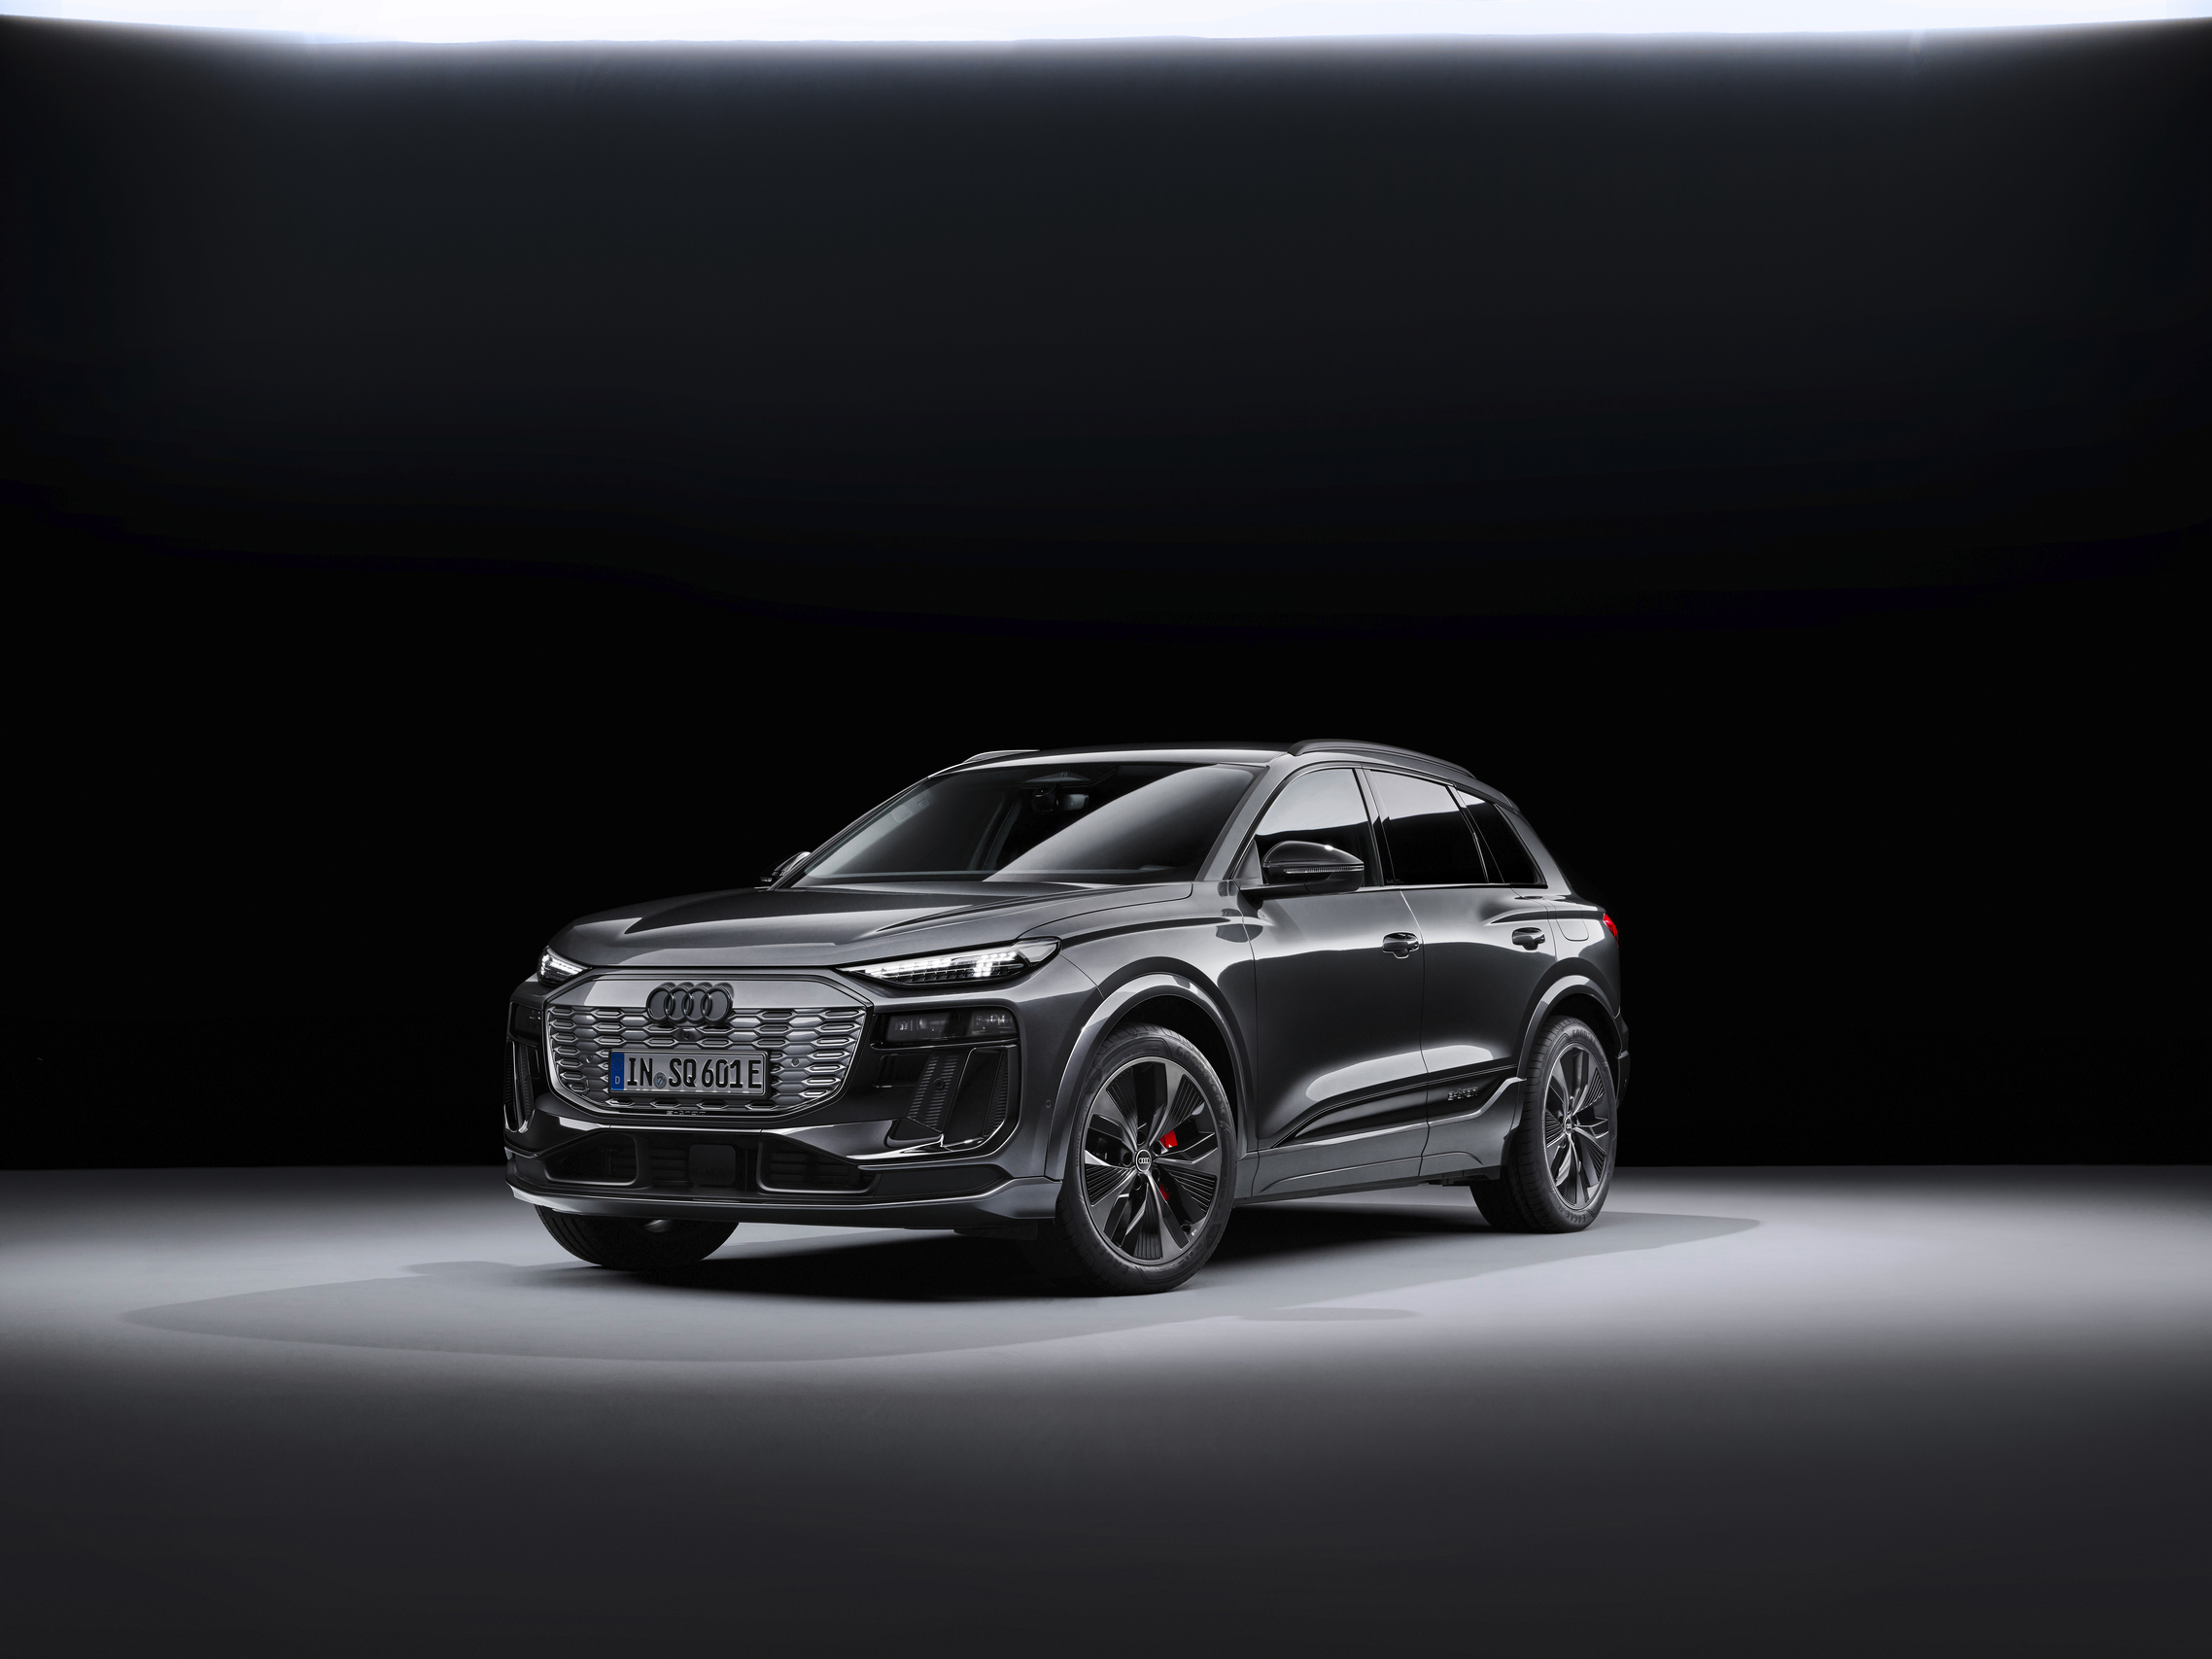 Audi is working on the RS Q6 e-tron crossover with units from the Porsche Macan Turbo